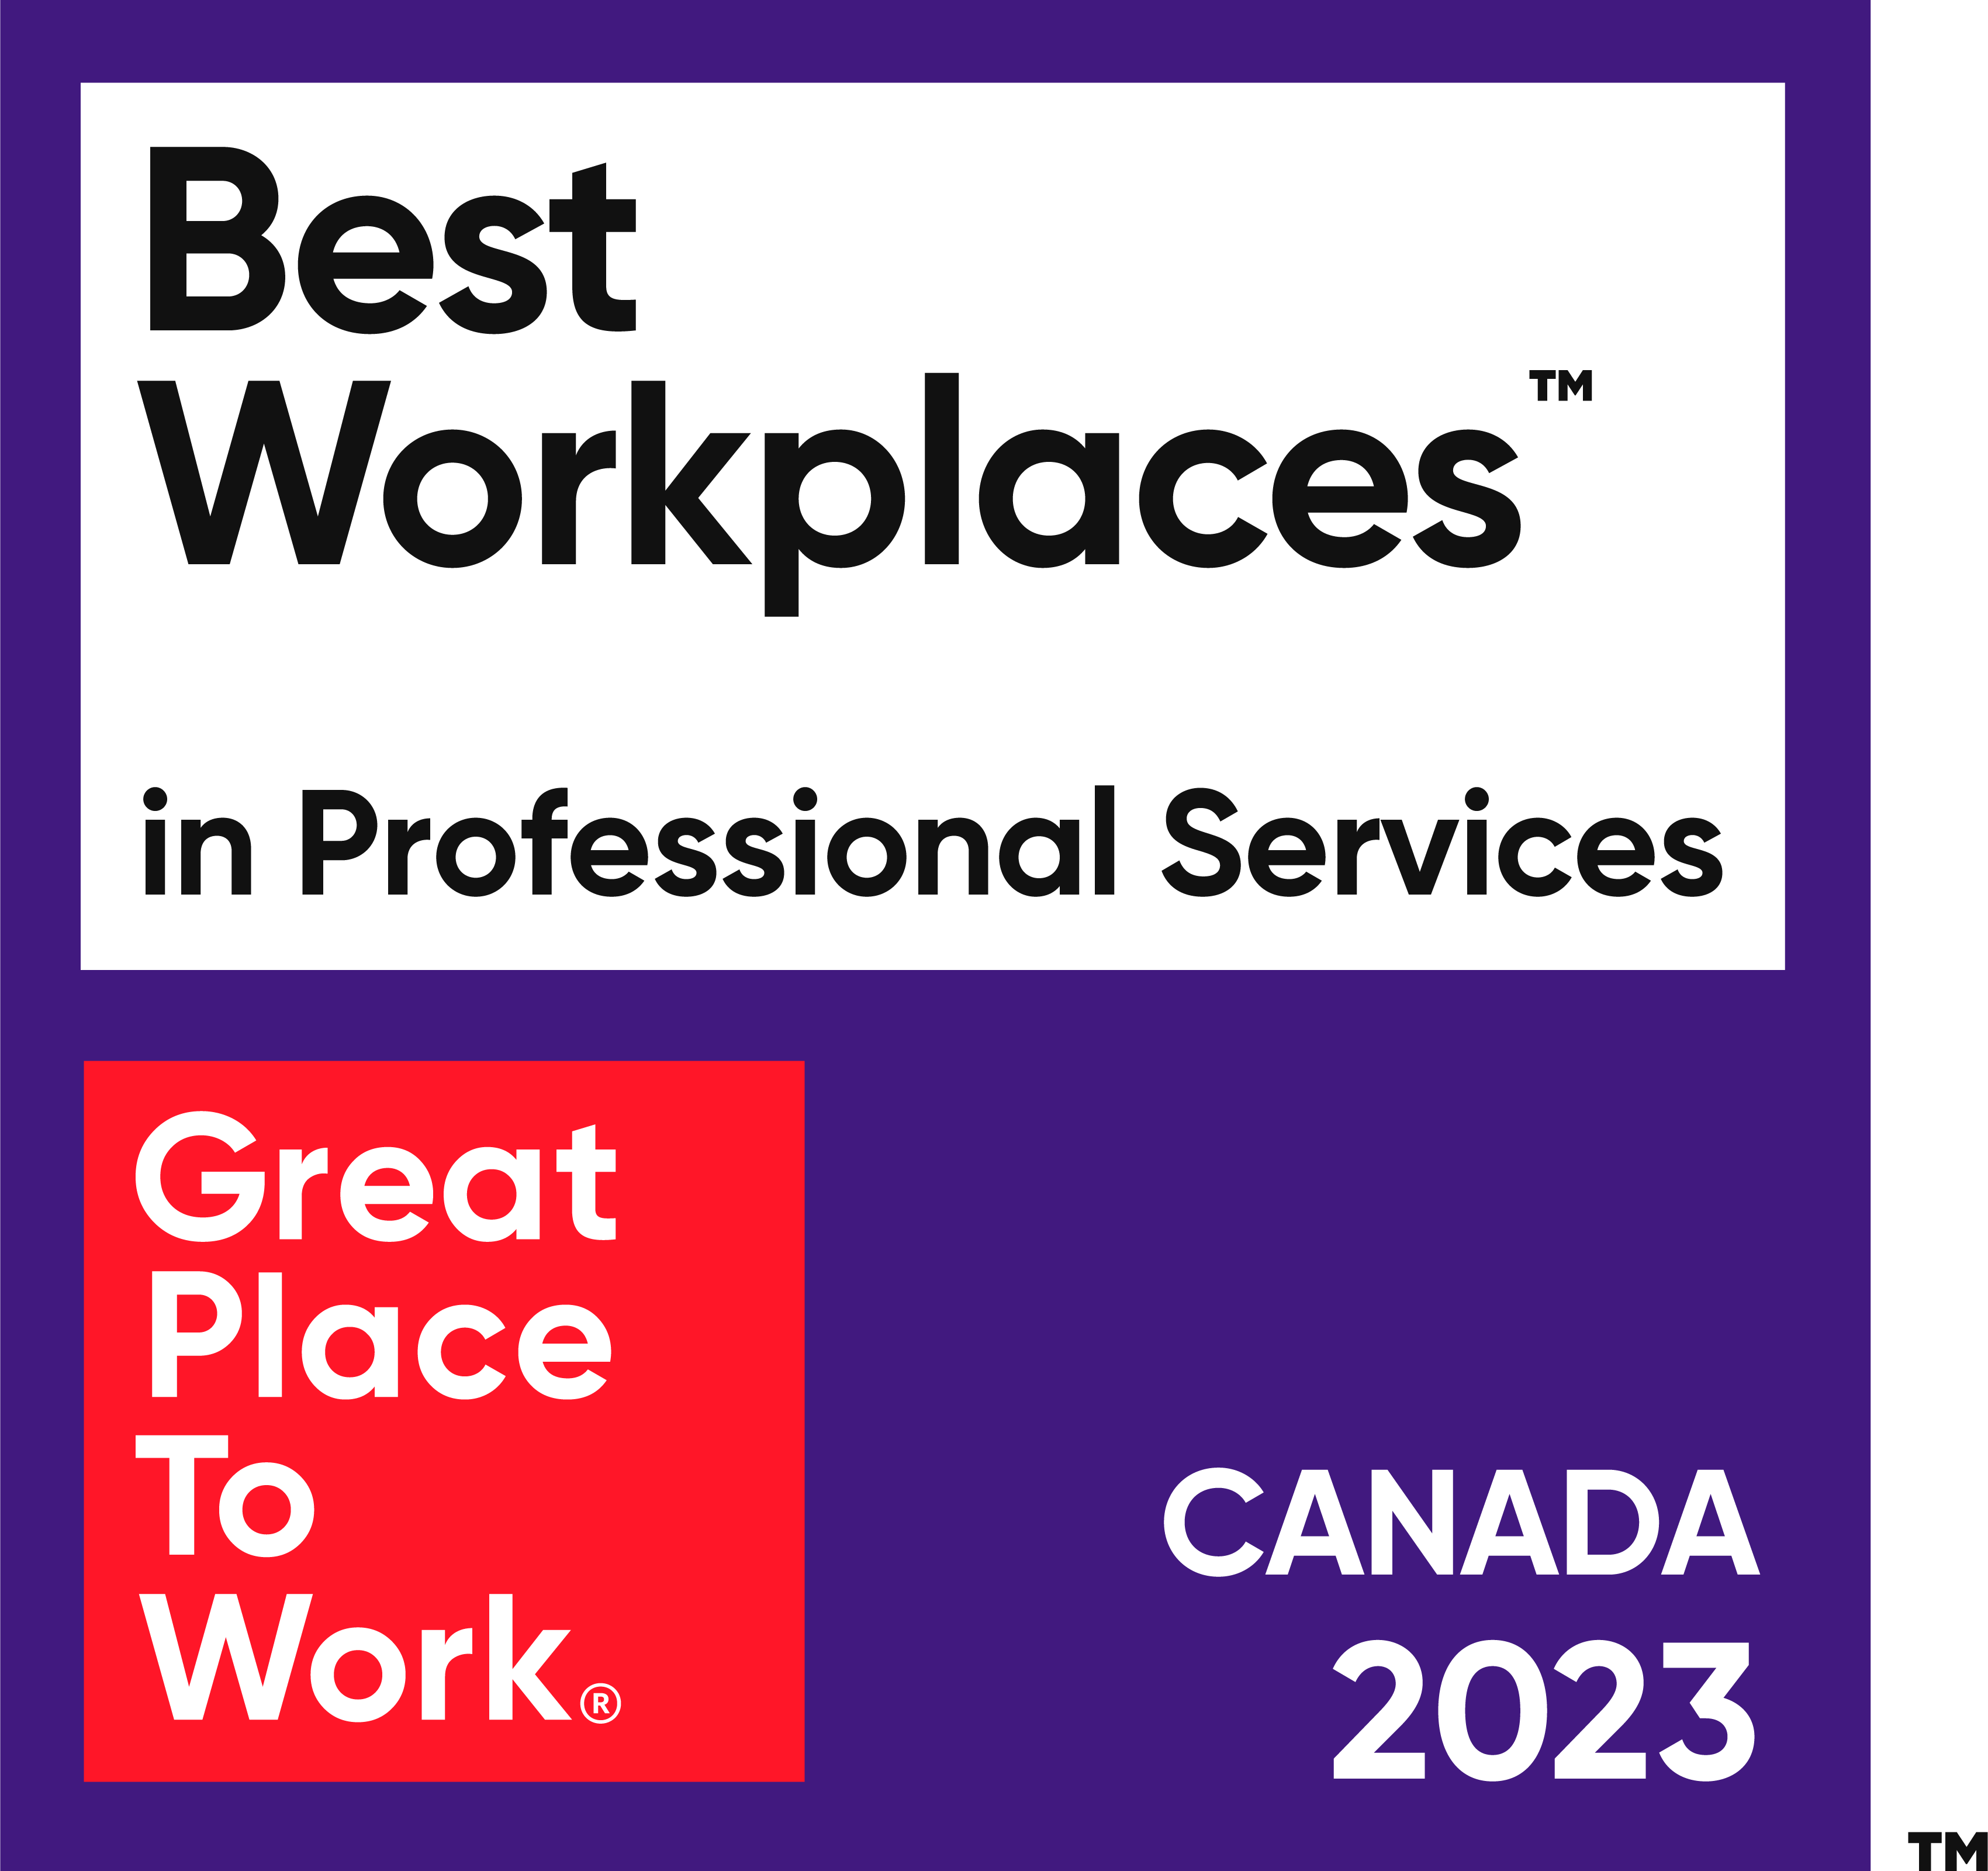 Best Workplace in Professional Services - Great Place To Work